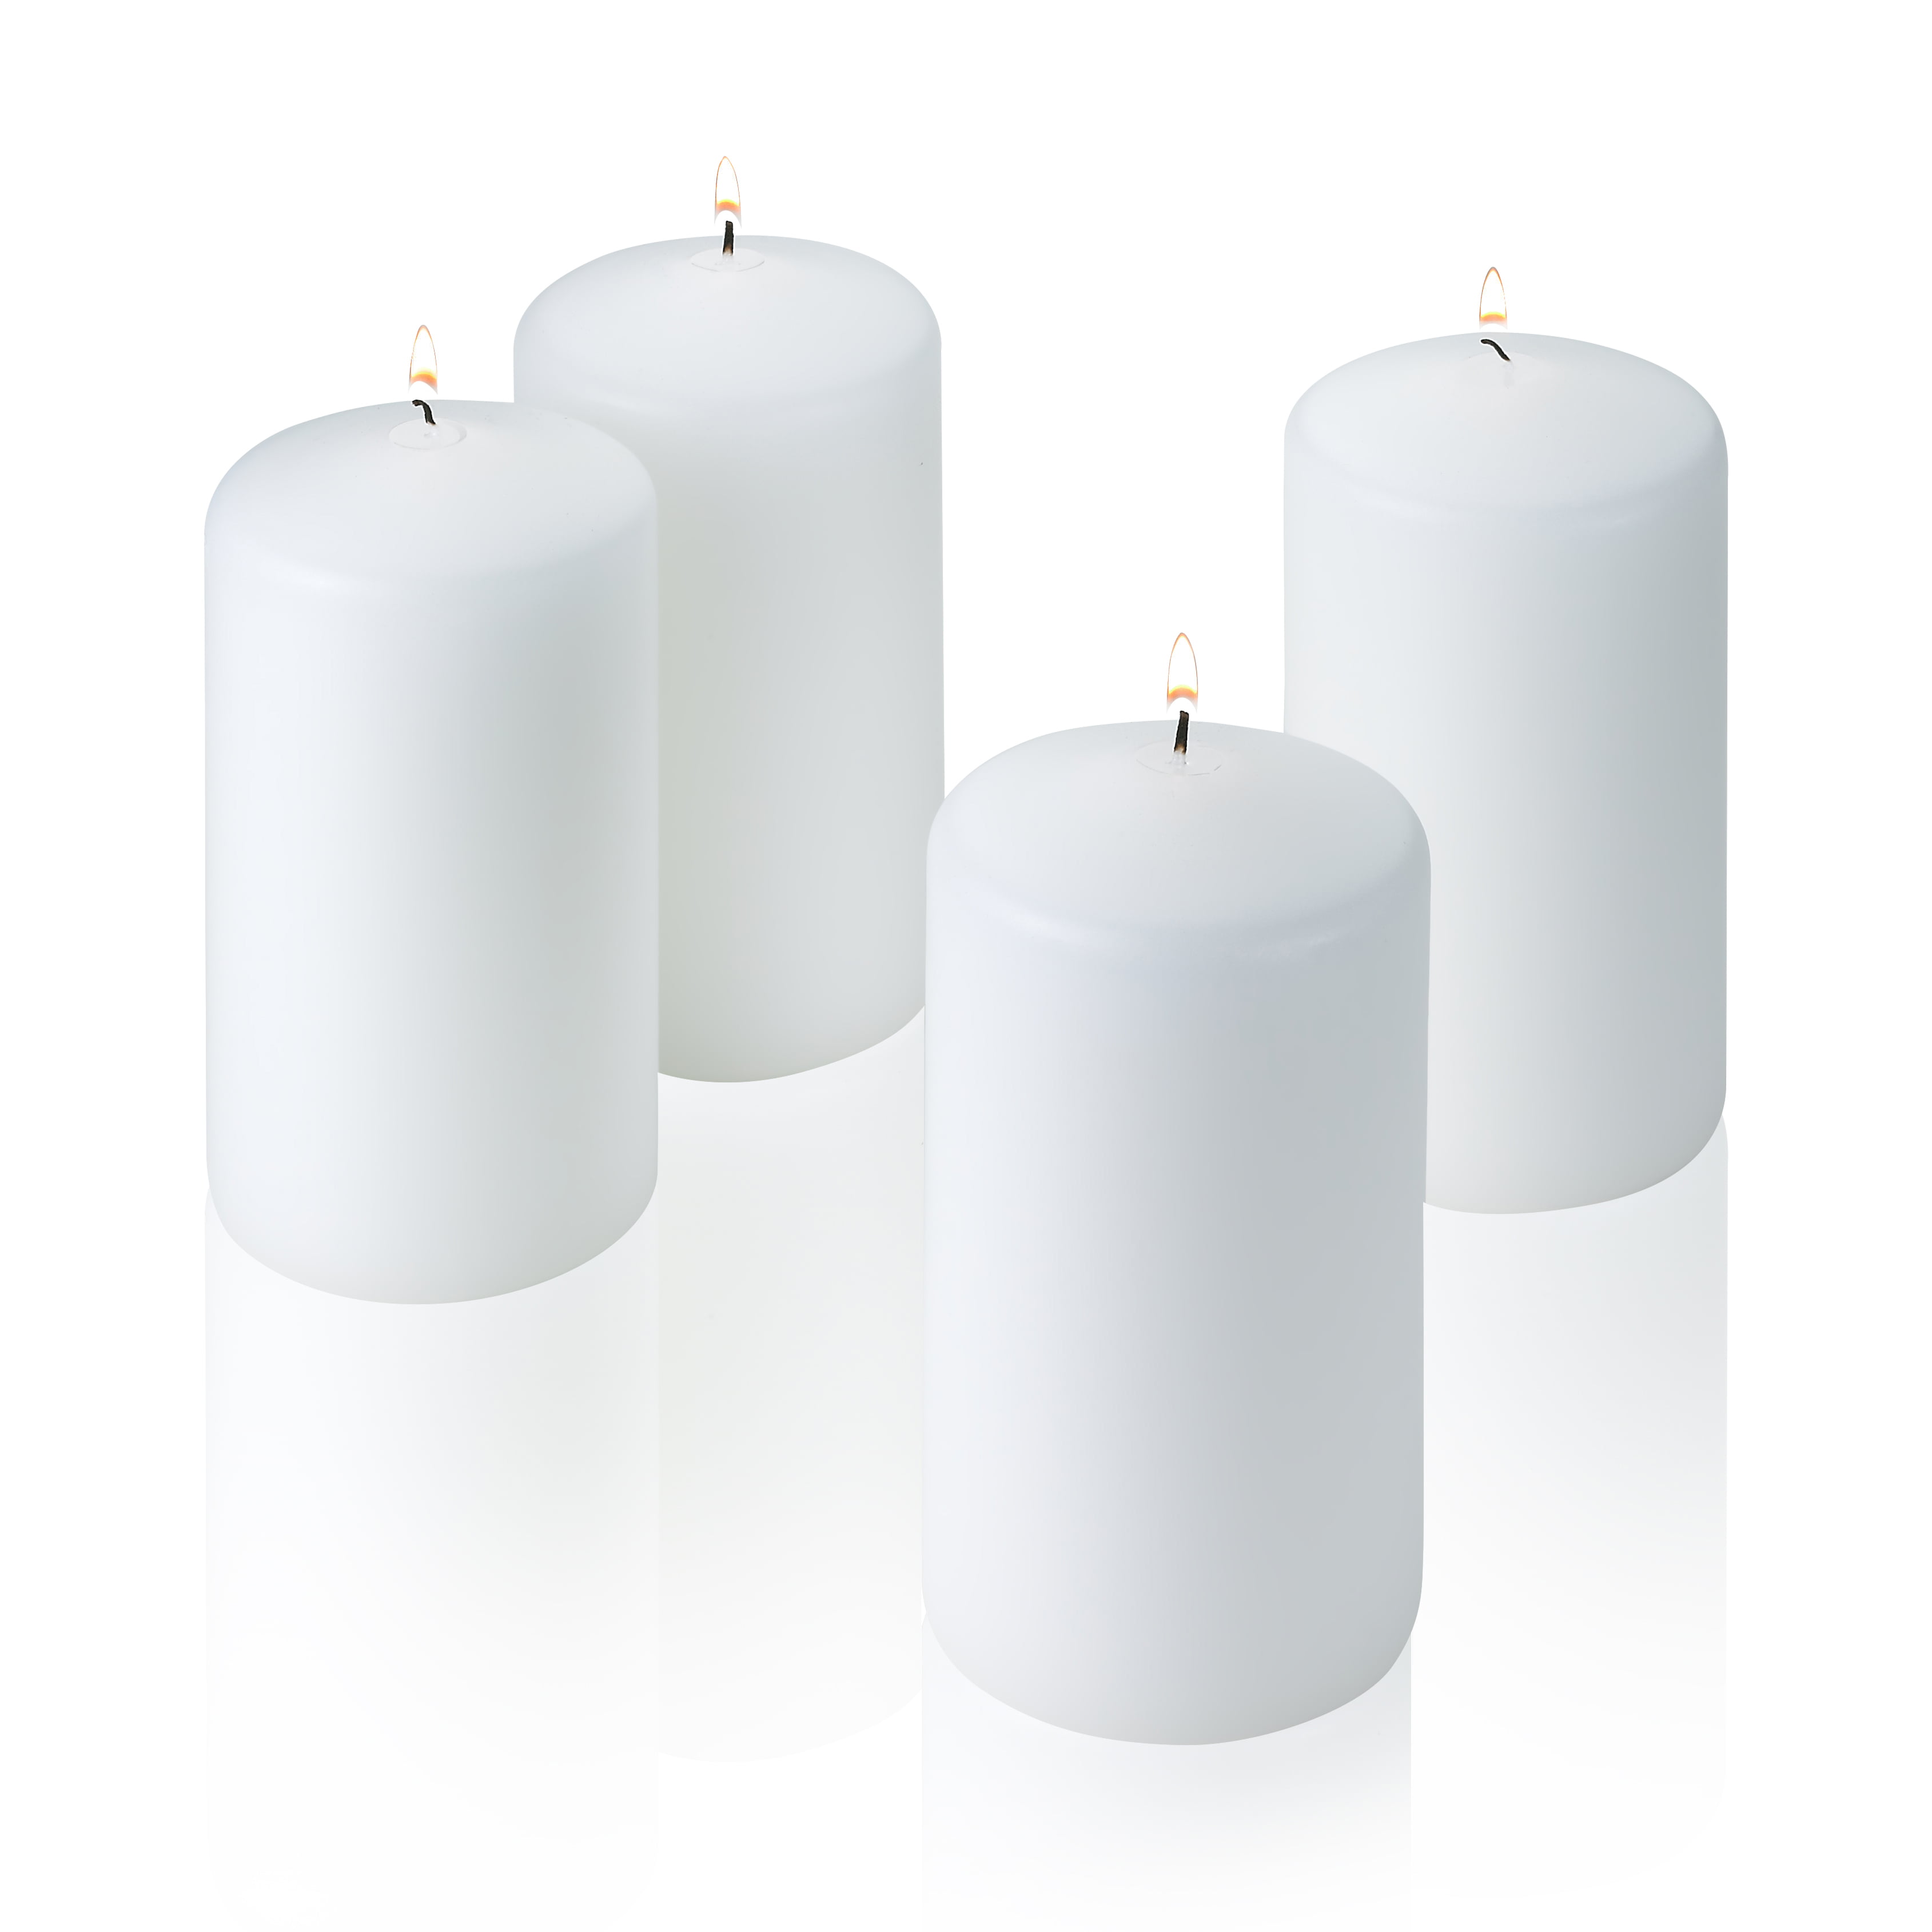 3X9-Inches Hannas Unscented Pillar Candle White Hanna's Candle Company CP003